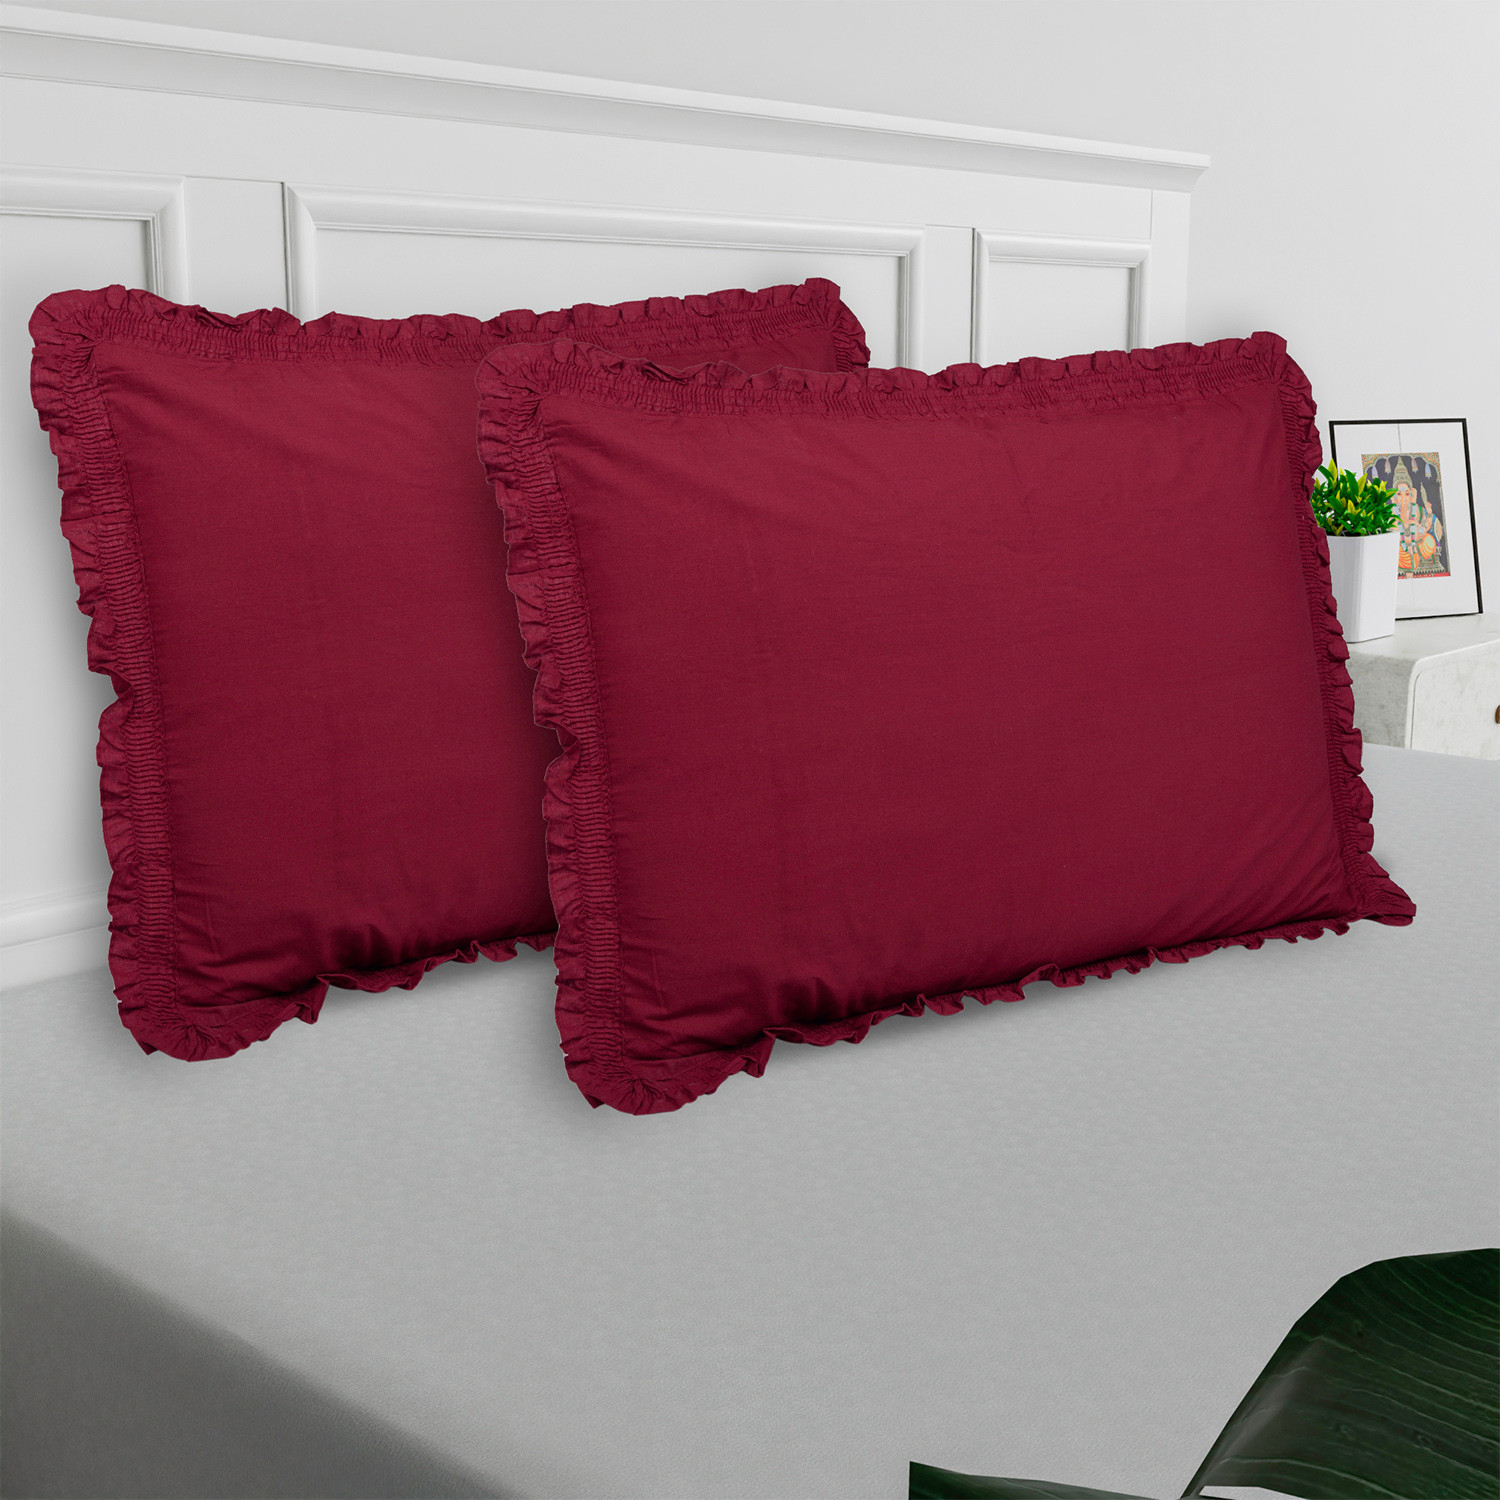 Kuber Industries Pillow Cover | Cotton Pillow Cover | Pillow Cover For Bedroom | Pleated Frill Border Long Crush Pillow Cover | Set of 6 | 20x30 Inch | Maroon